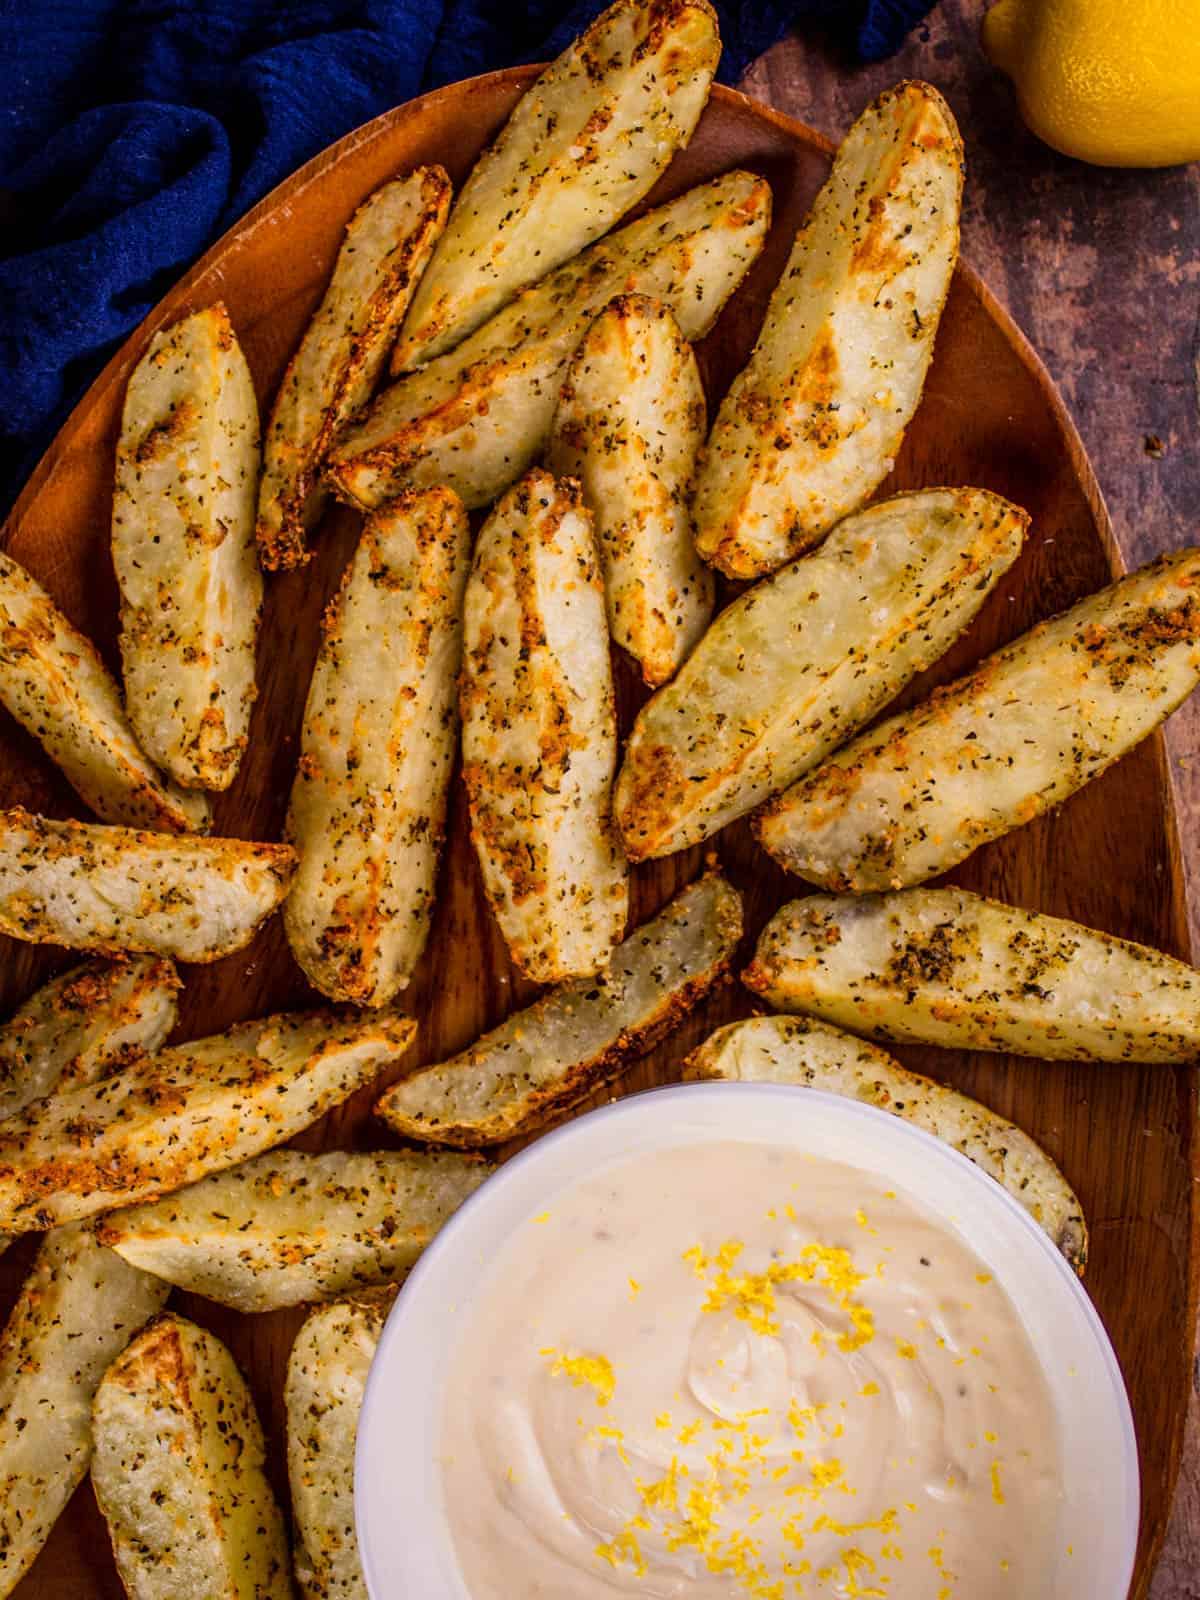 roasted potato wedges on a wooden tray with a bowl of dip